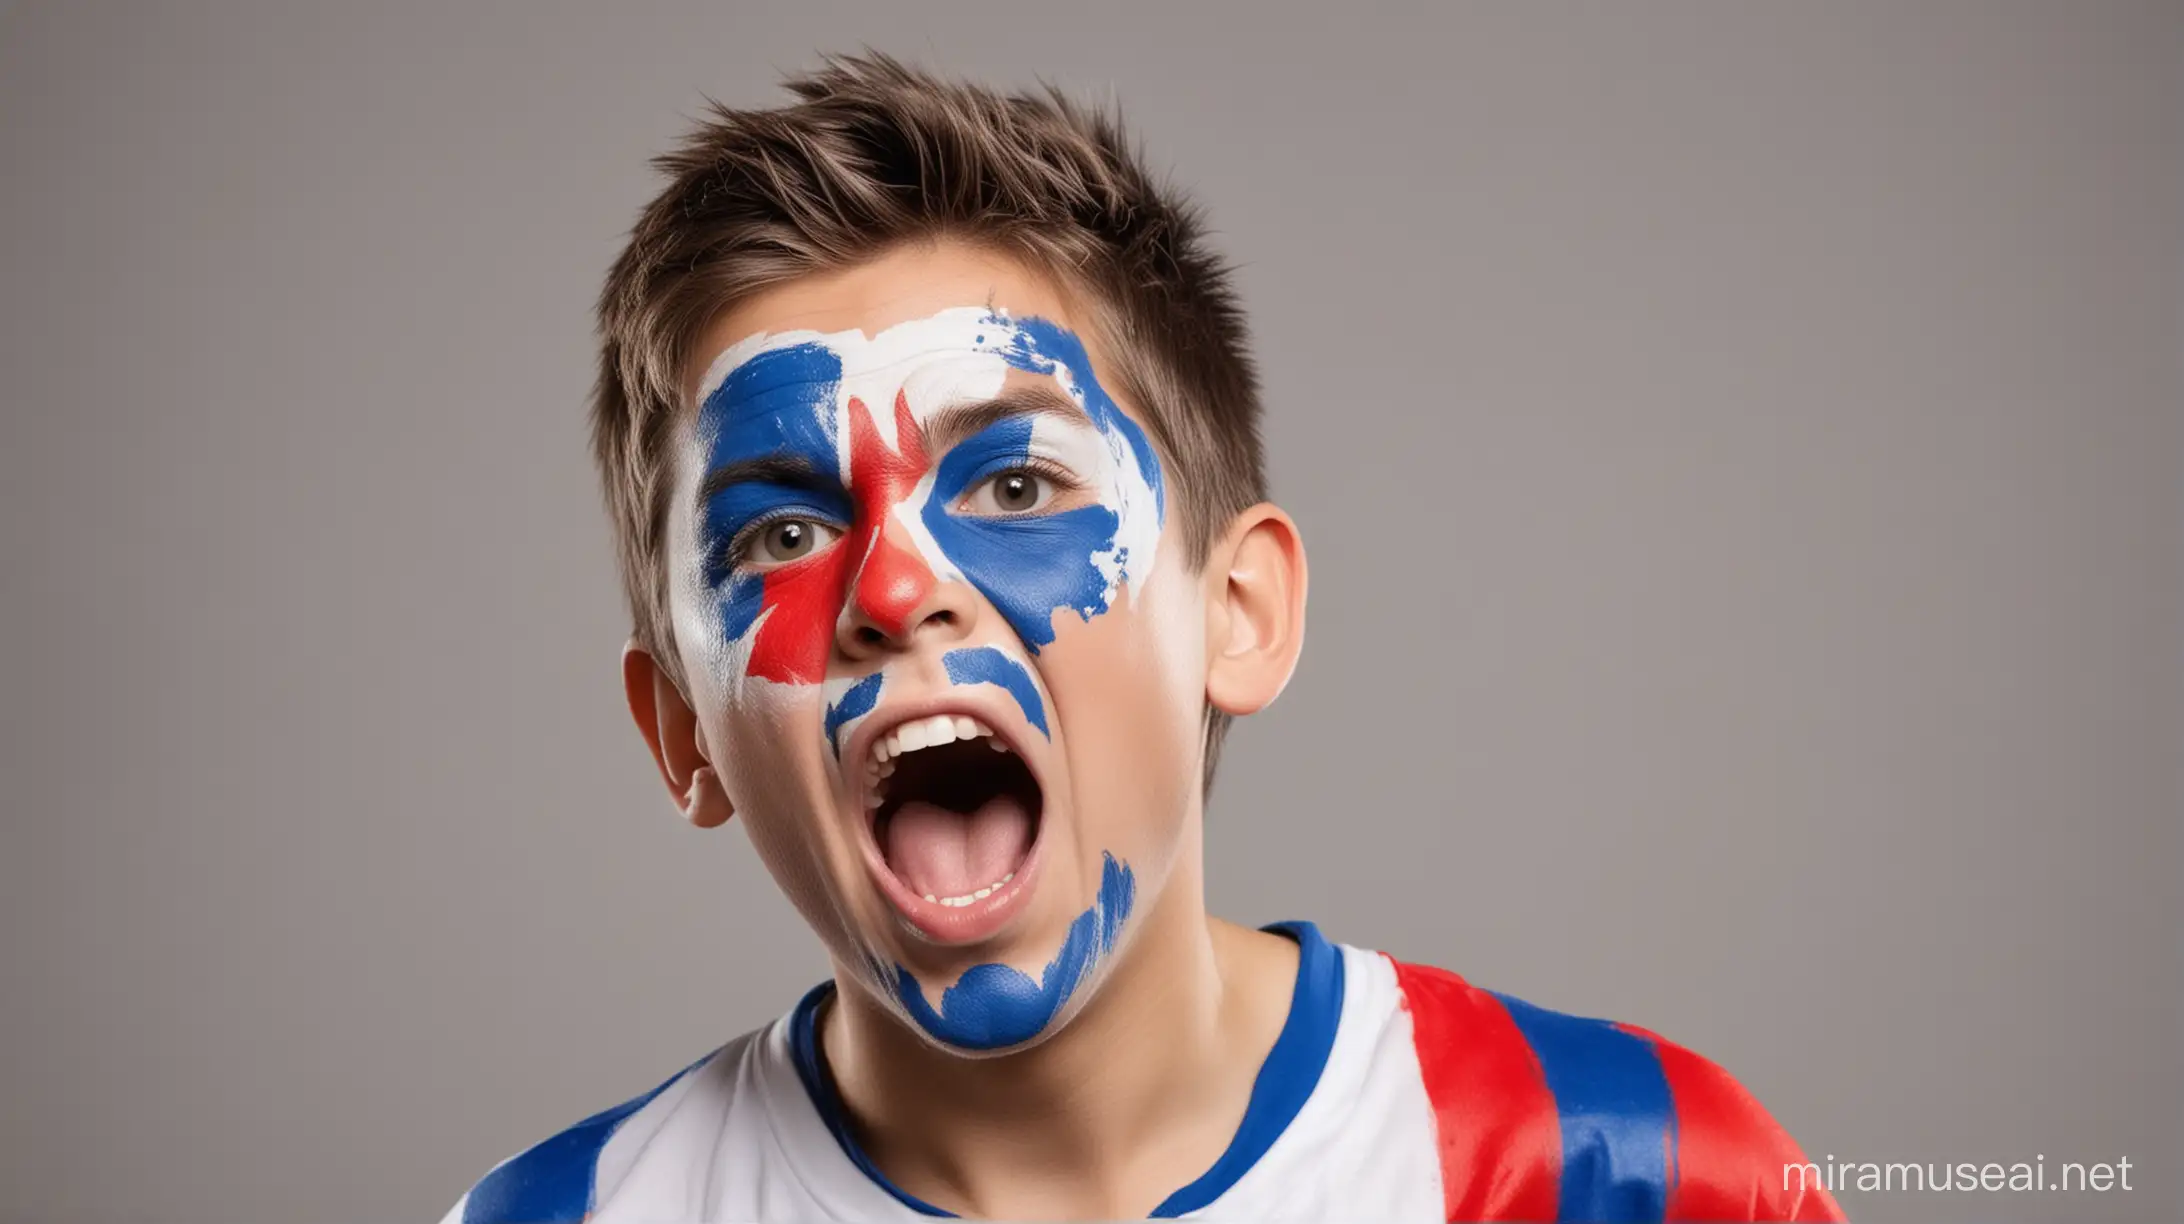 Super soccer fan, painted face, shouting full boy standing isolated 